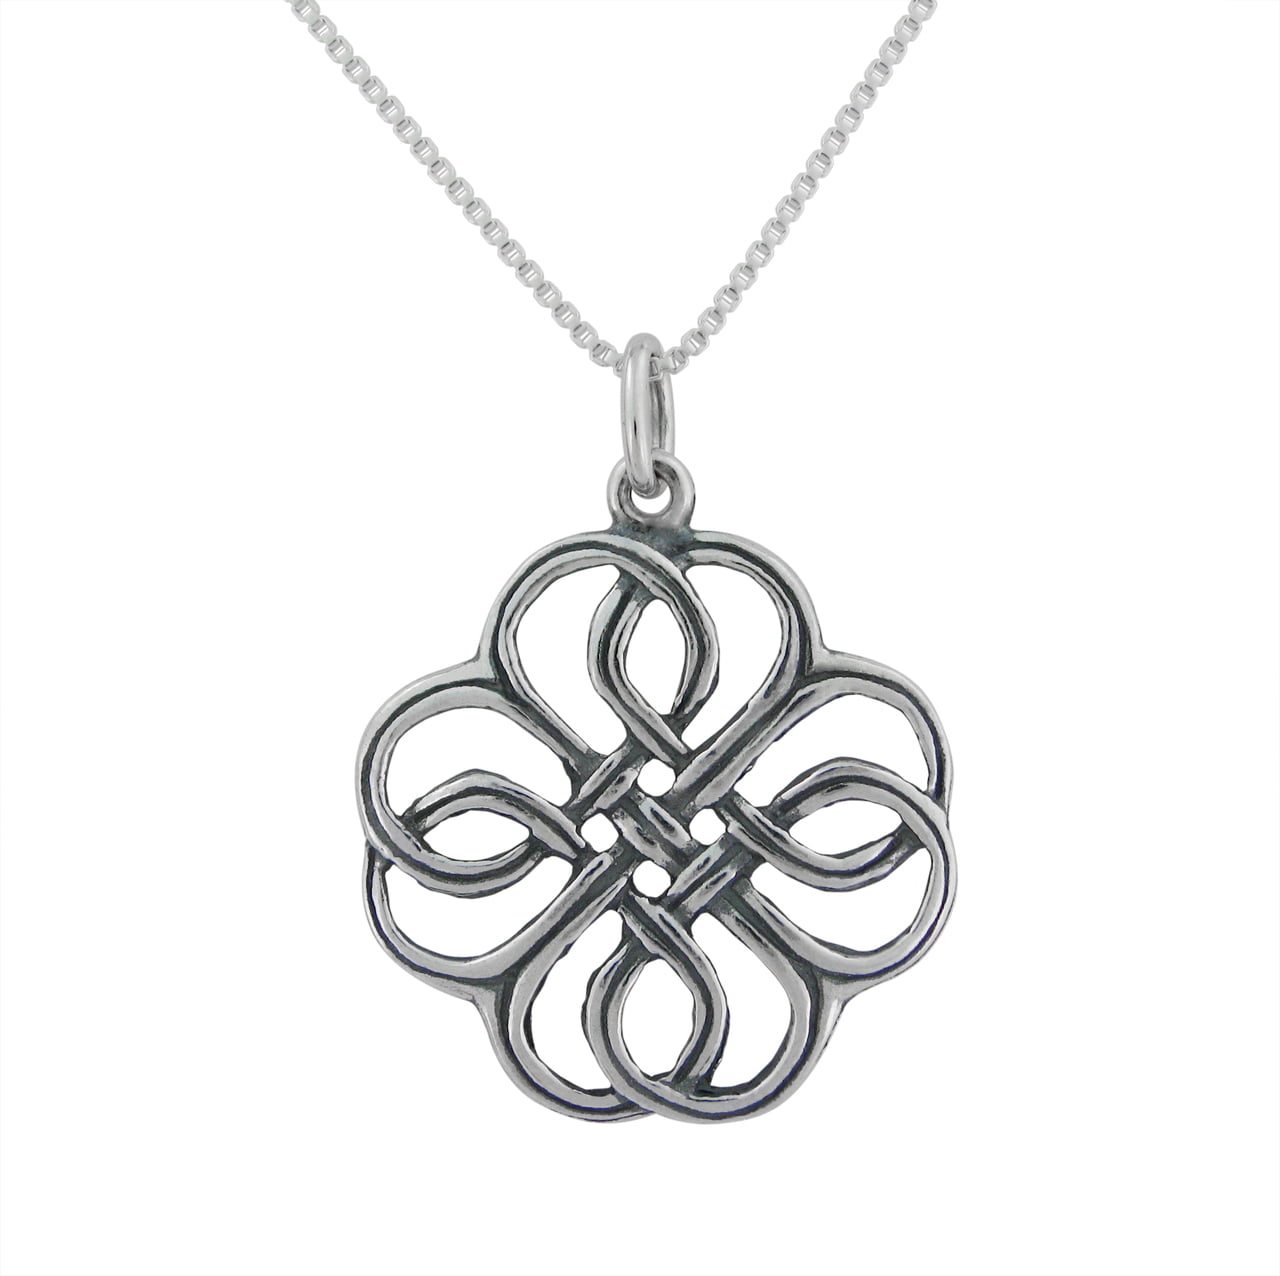 1 1/4 inch tall Sterling Silver Flower Pendant